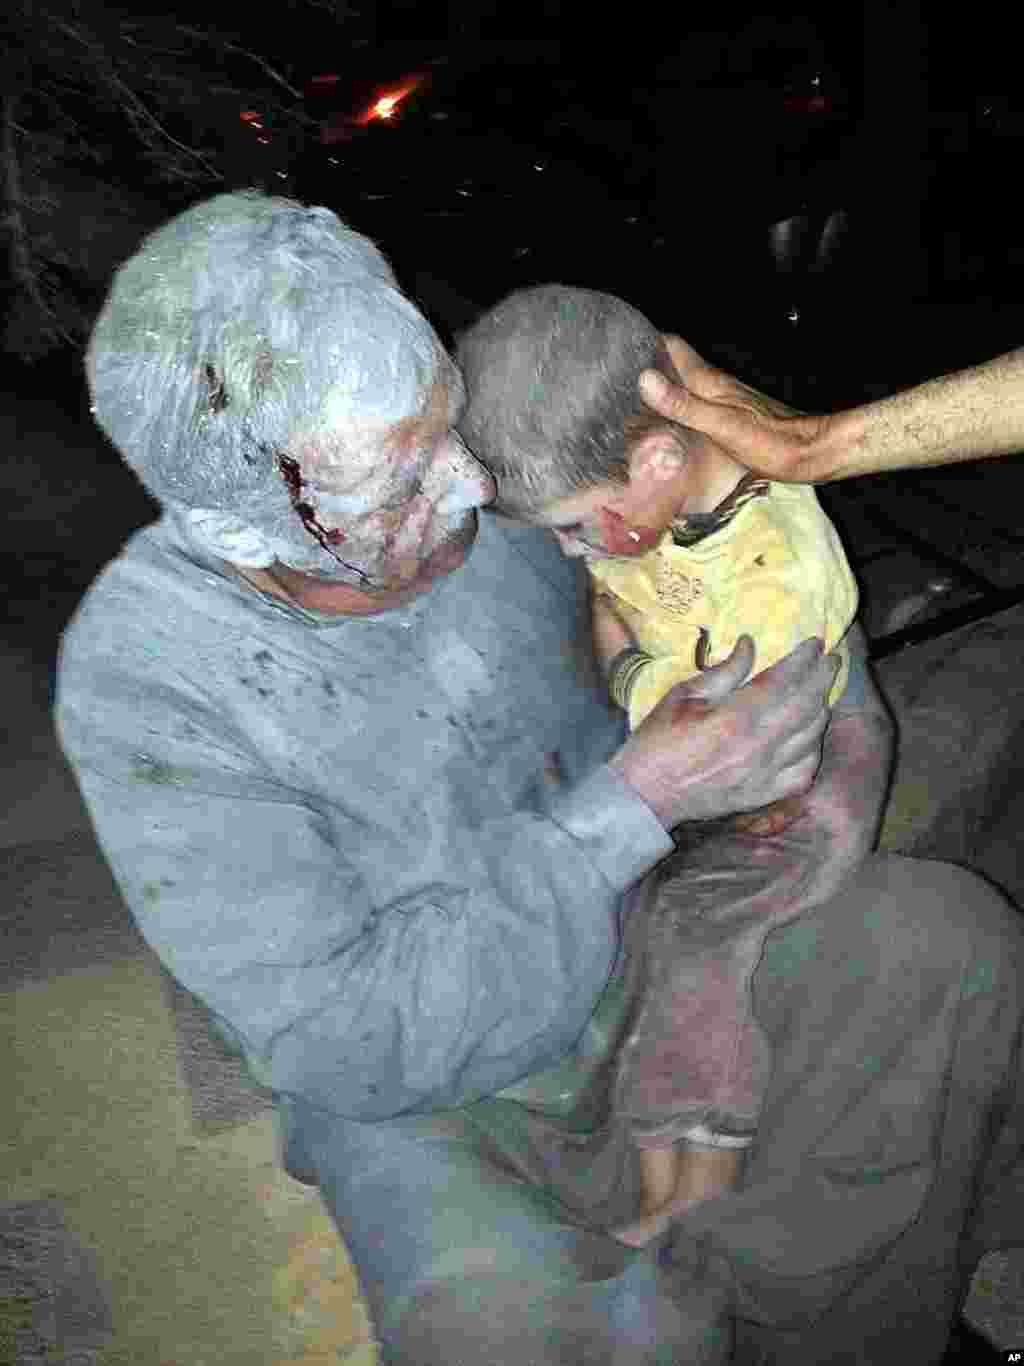 This citizen journalism image shows a wounded Syrian man holding his injured son after an air raid on the northwestern town of Saraqeb in the province of Idlib, Syria, April 25, 2013. (Edlib News Network ENN)